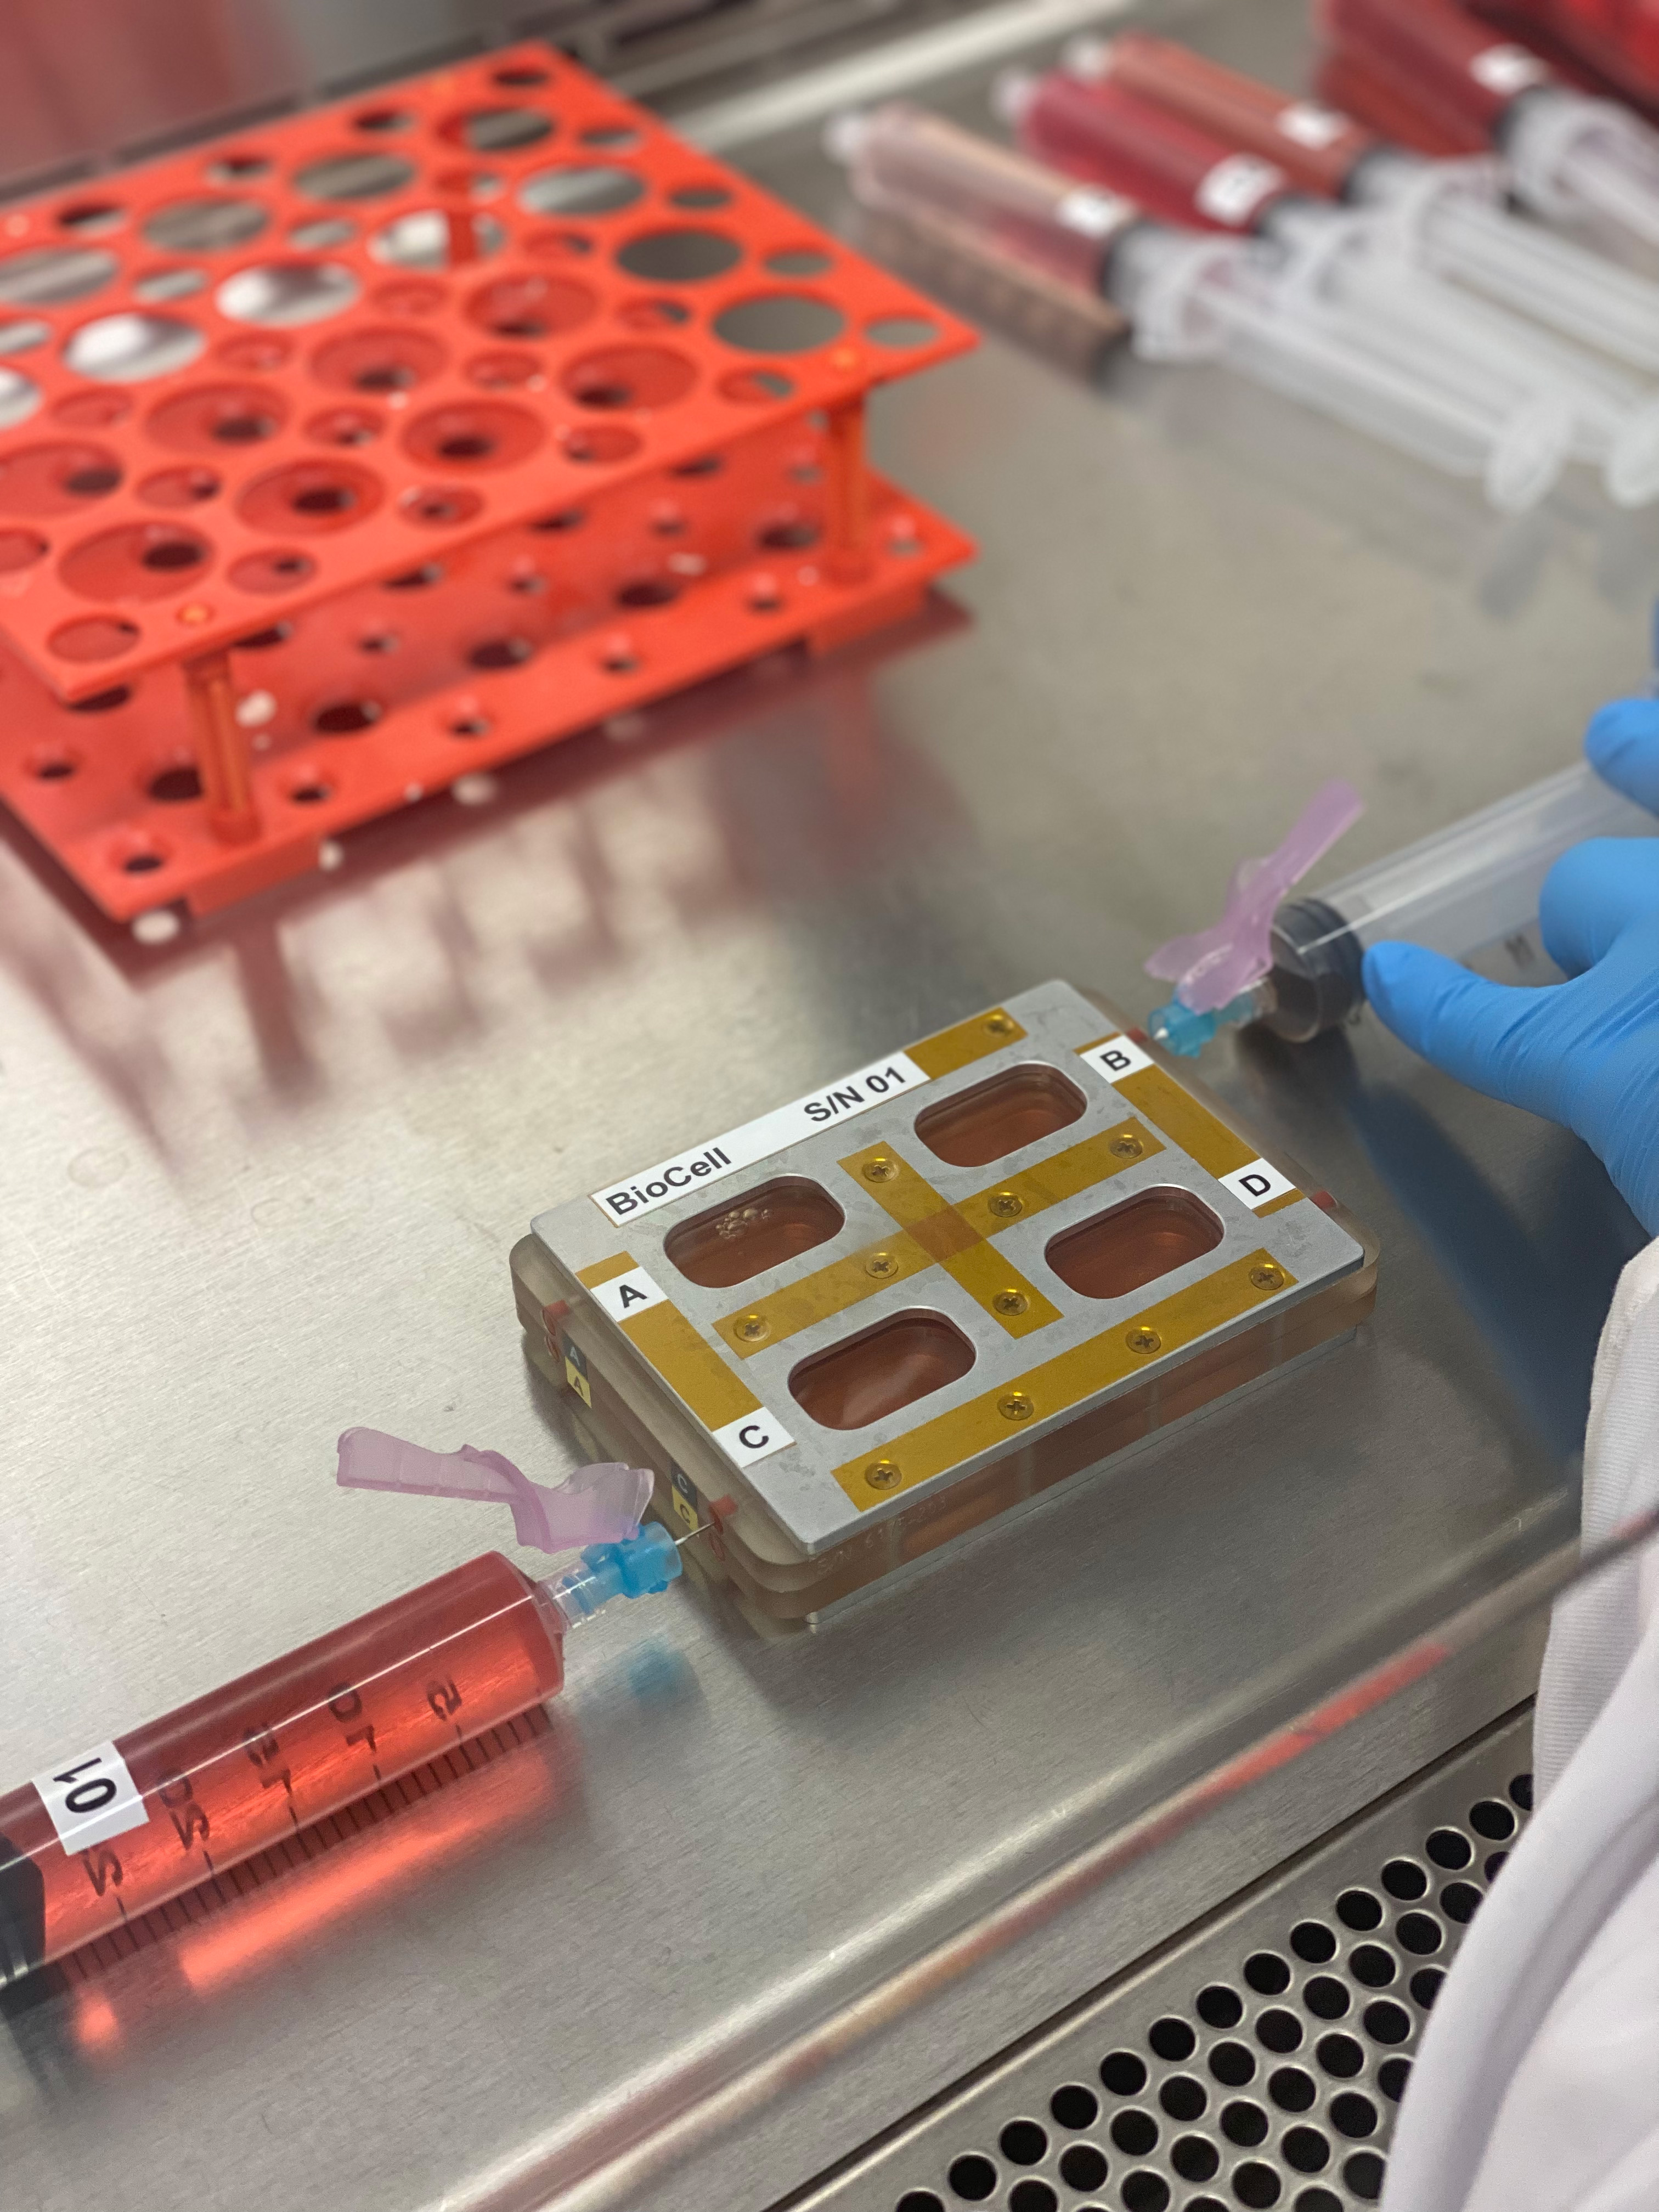 Pre-flight preparation of tissue chips for the Immunosenescence investigation, which studies the effects of microgravity on immune function to determine the mechanisms behind immune system aging.